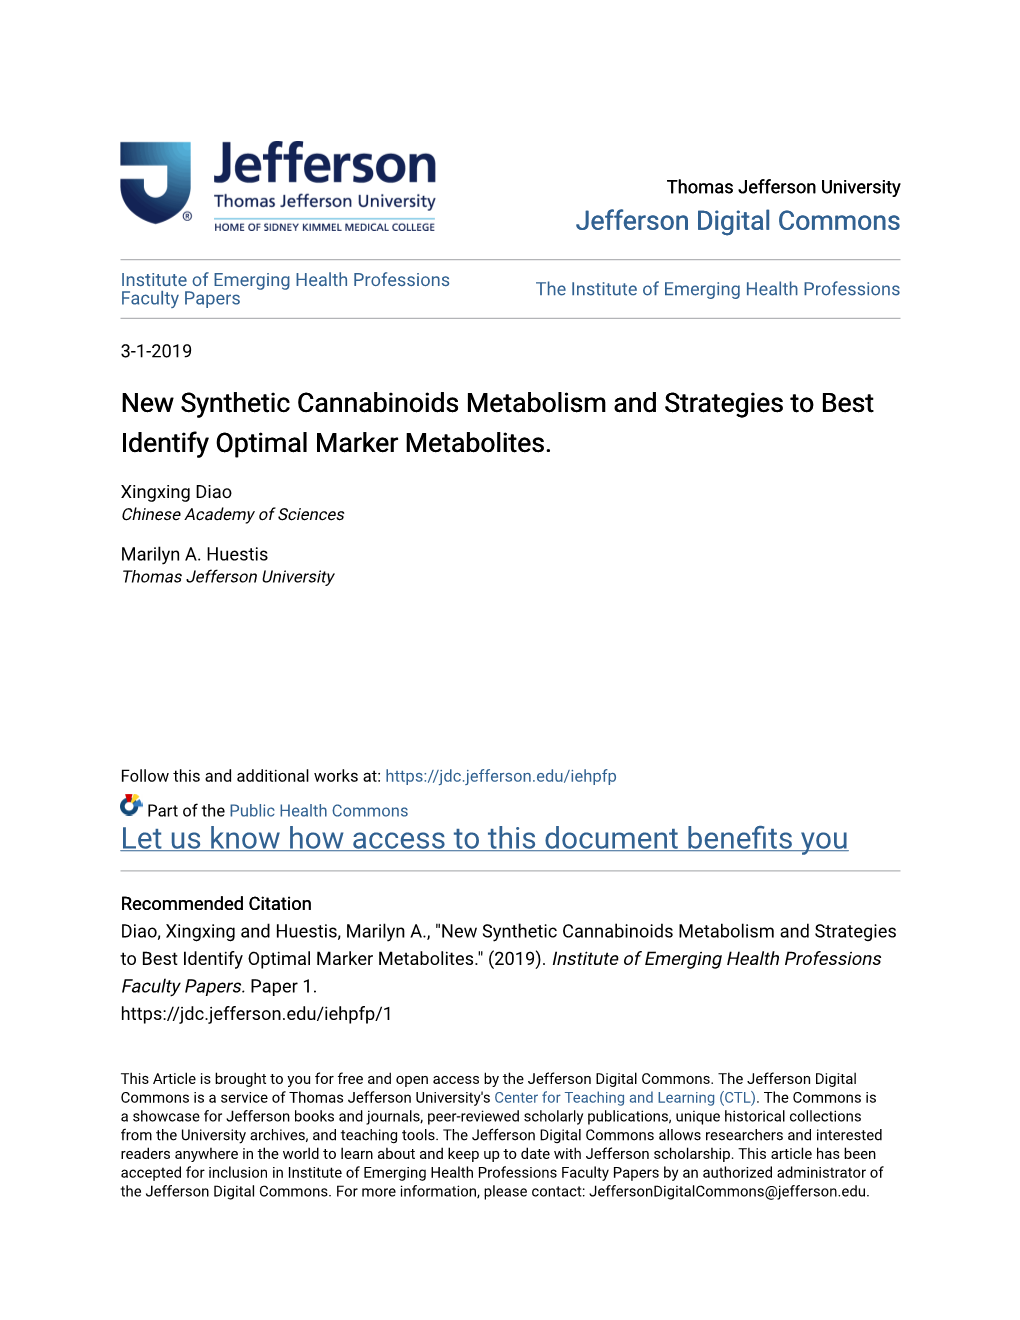 New Synthetic Cannabinoids Metabolism and Strategies to Best Identify Optimal Marker Metabolites